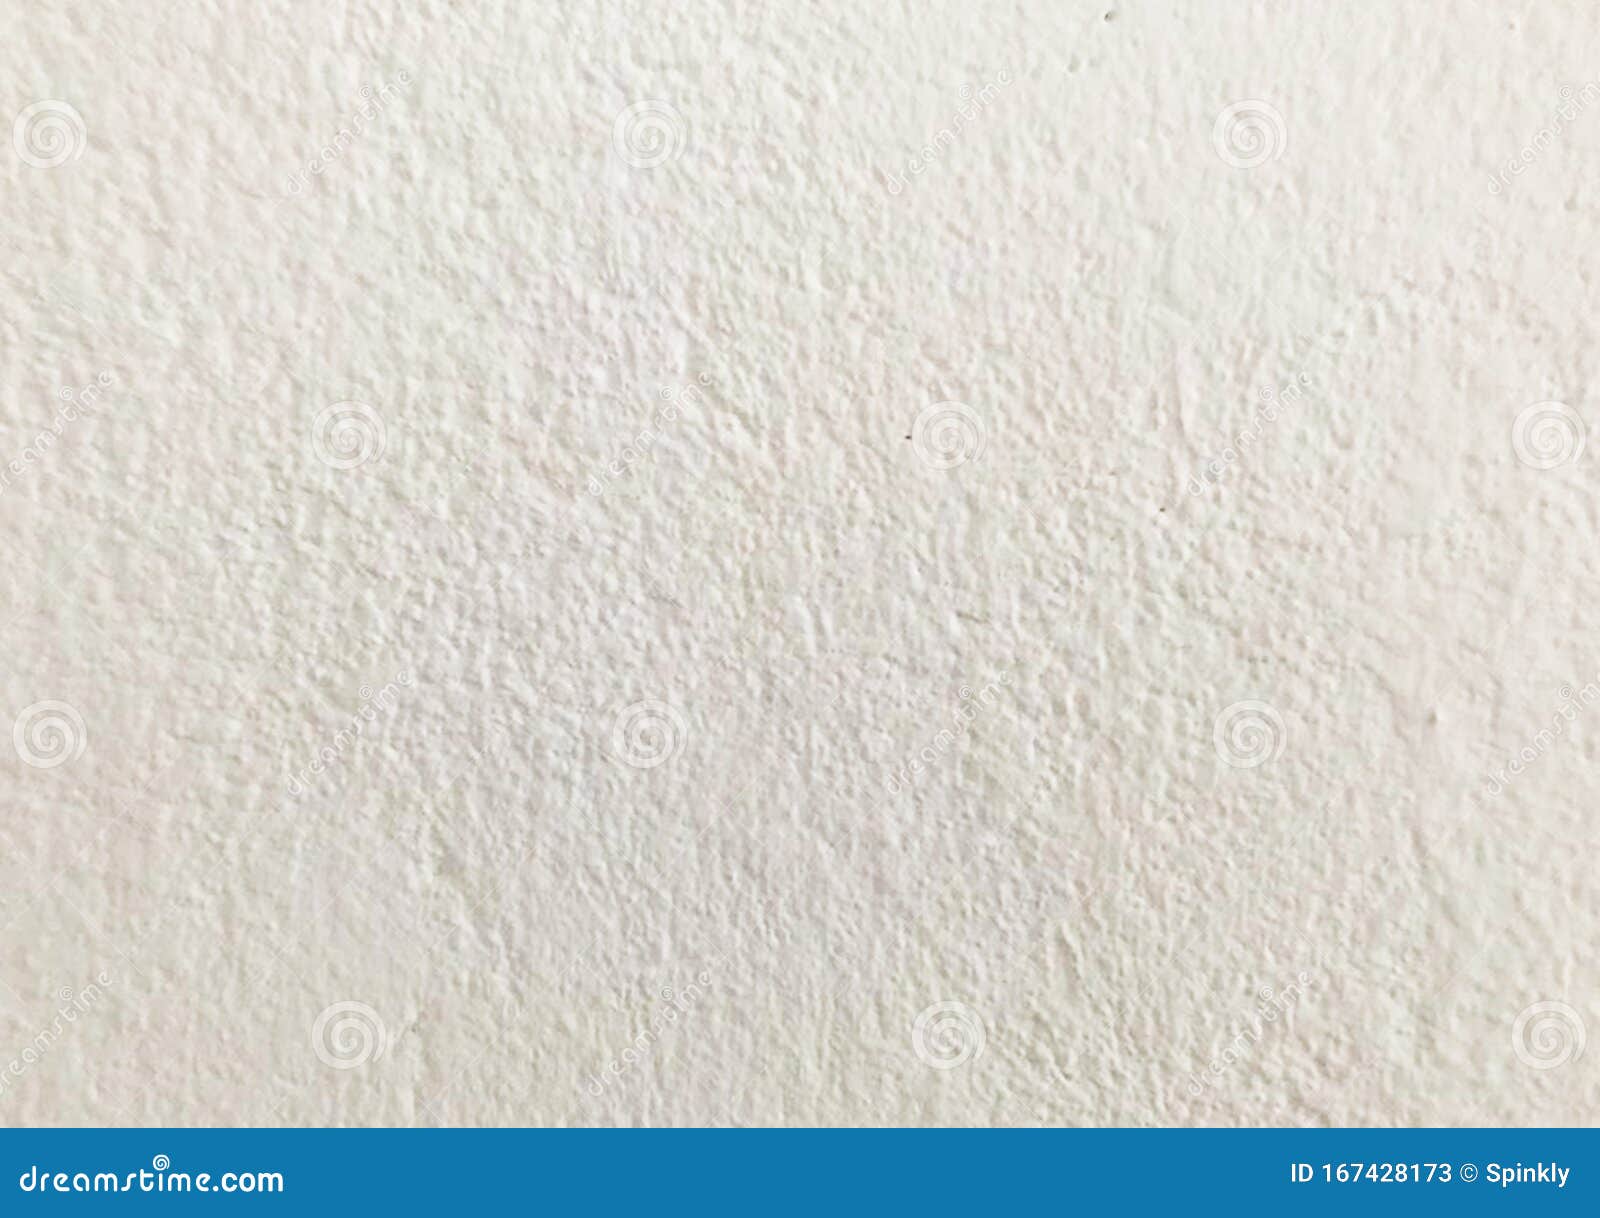 White Textured Background Wallpaper for Designs Stock Image - Image of  designs, design: 167428173